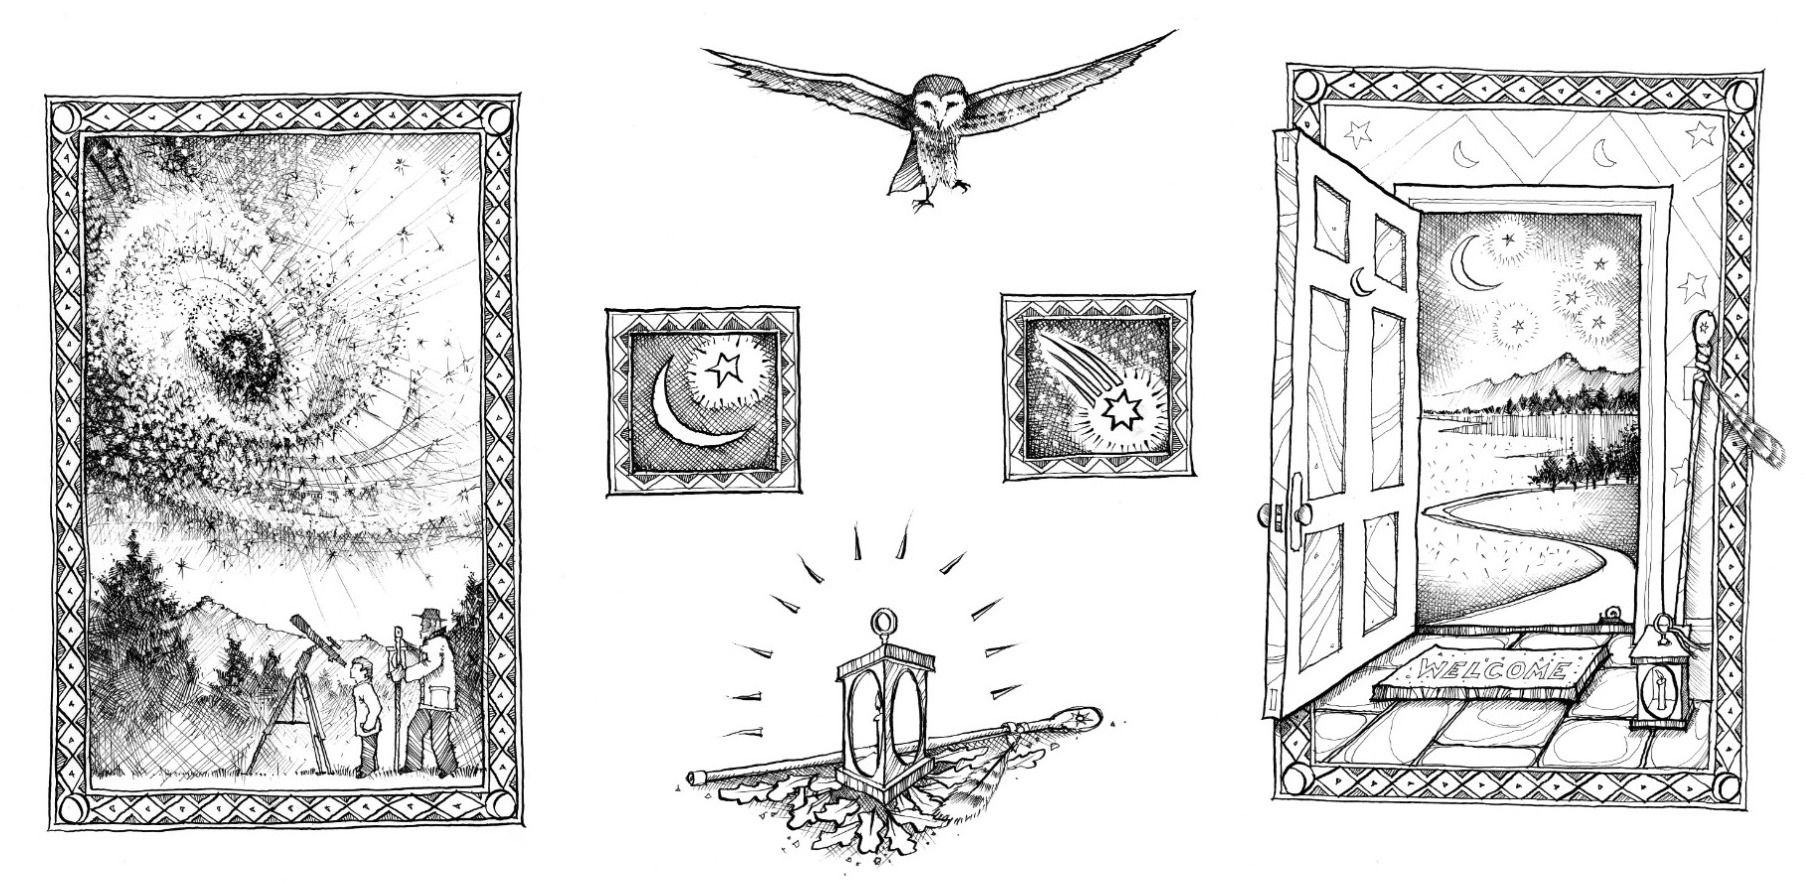 Illustrations for Chris Salisbury's 'Wild Nights Out', a handbook for nocturnal exploration